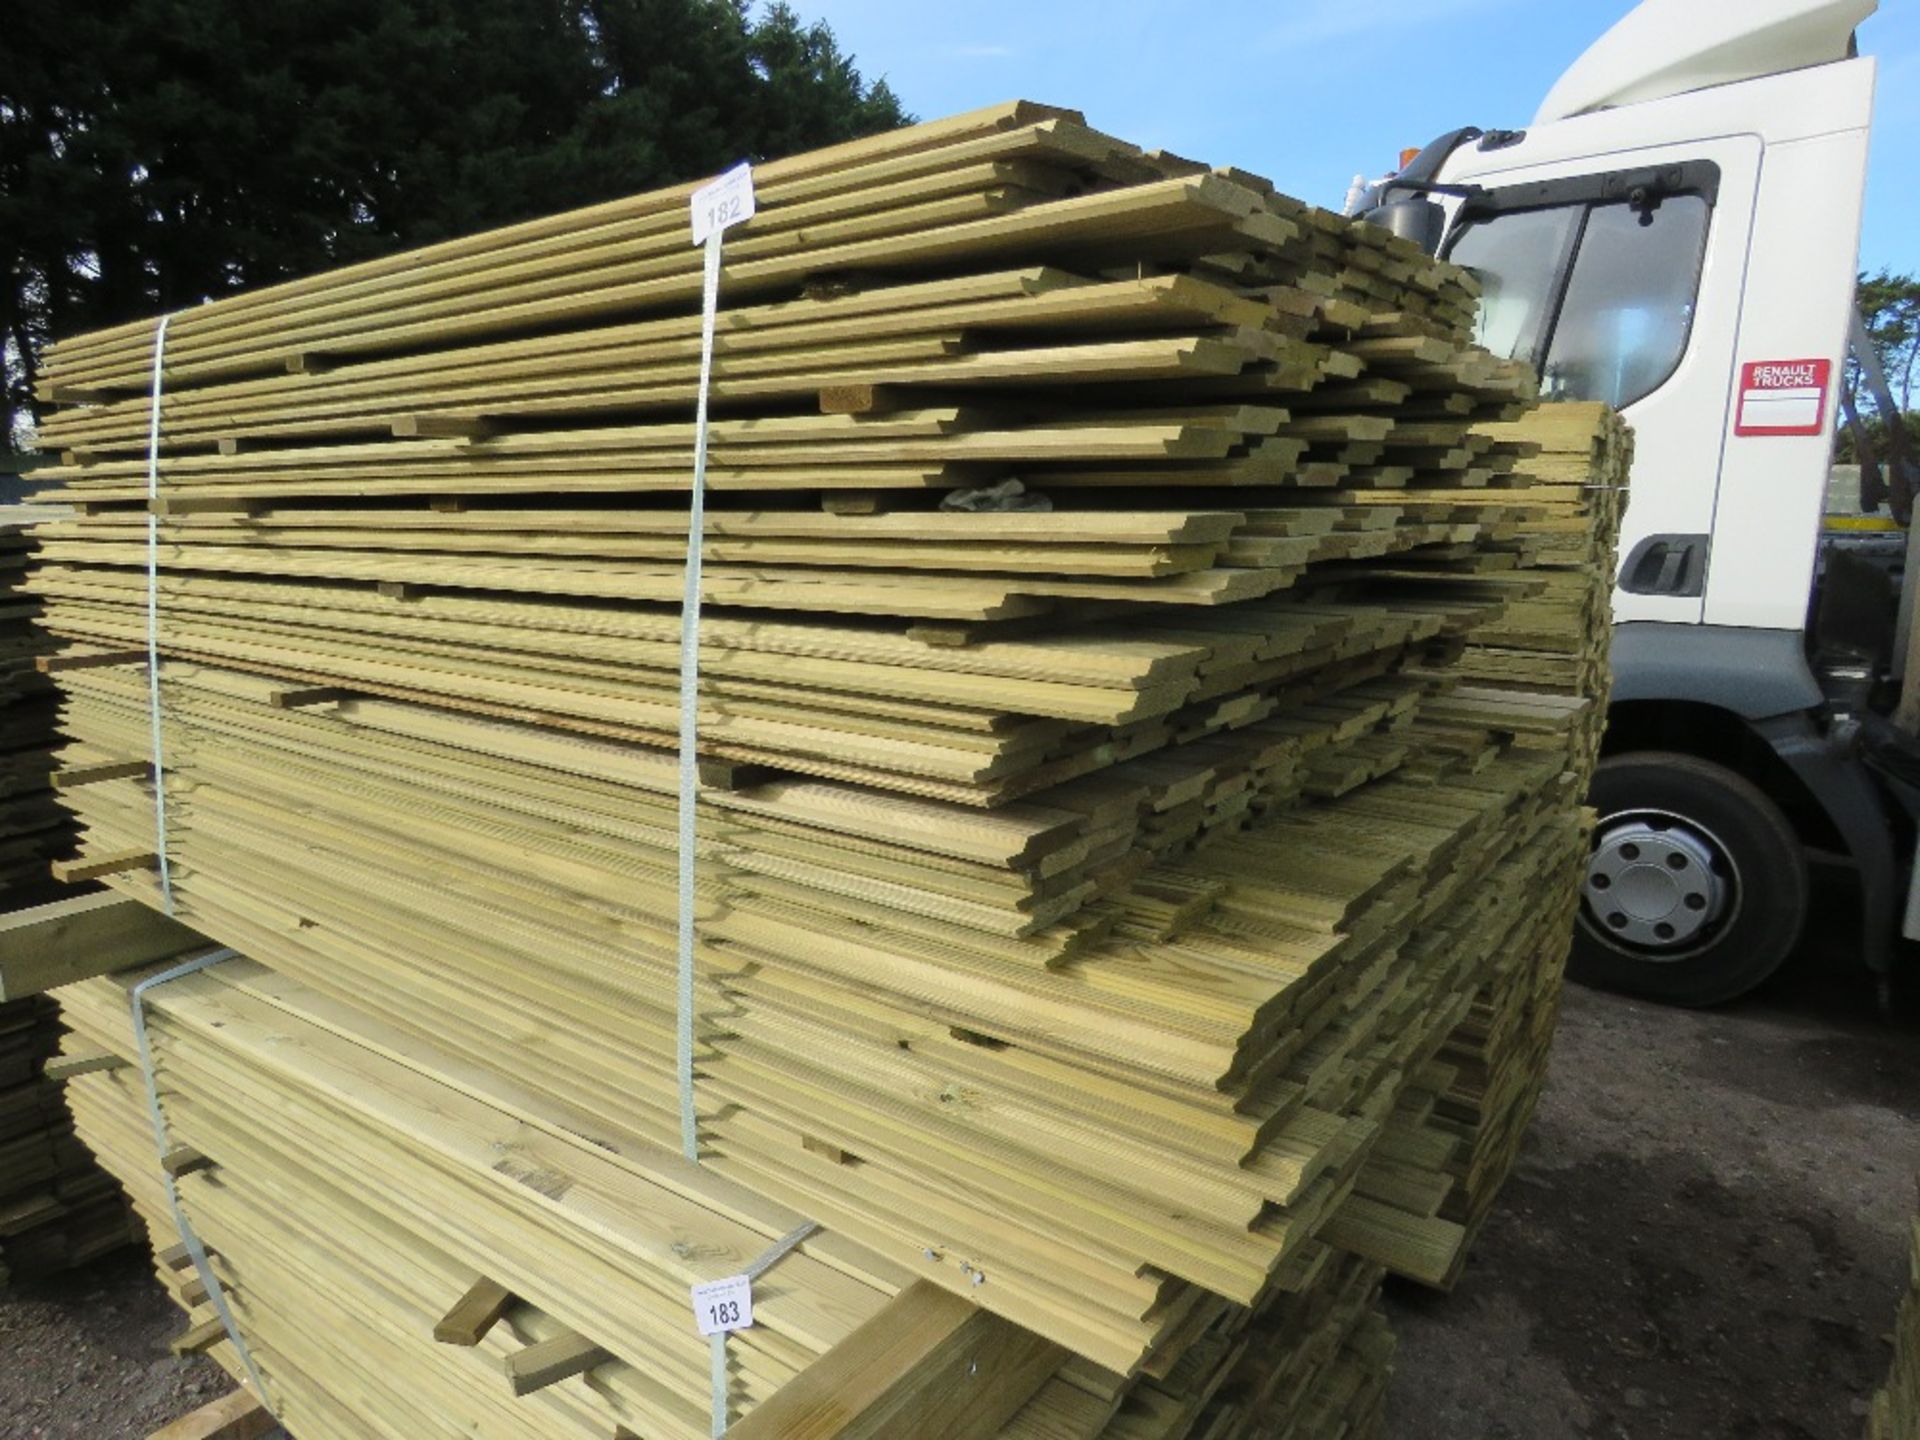 LARGE PACK OF PRESSURE TREATED SHIPLAP TYPE TIMBER CLADDING BOARDS. 1.73-1.93M LENGTH X 100MM WIDTH